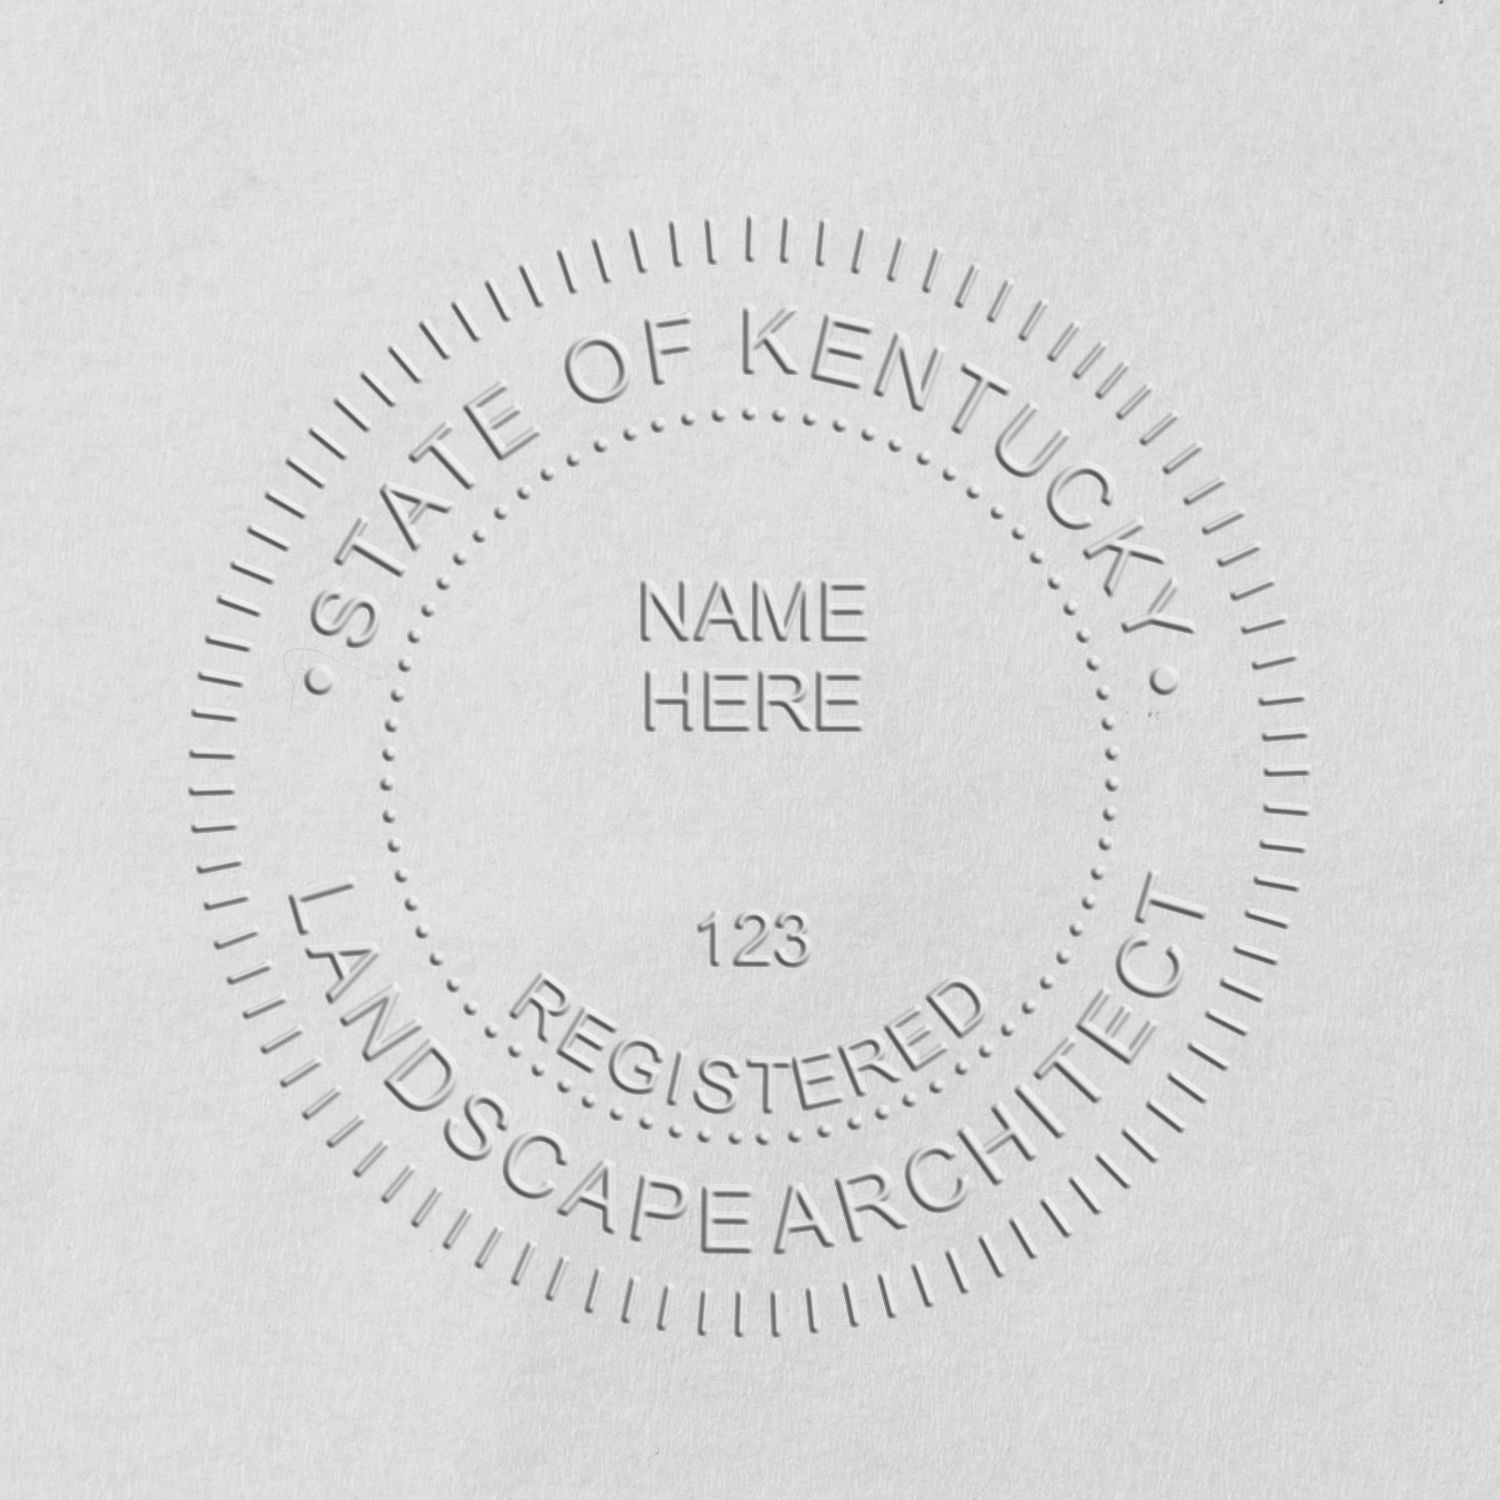 An alternative view of the Heavy Duty Kentucky Landscape Architect Cast Iron Embosser stamped on a sheet of paper showing the image in use